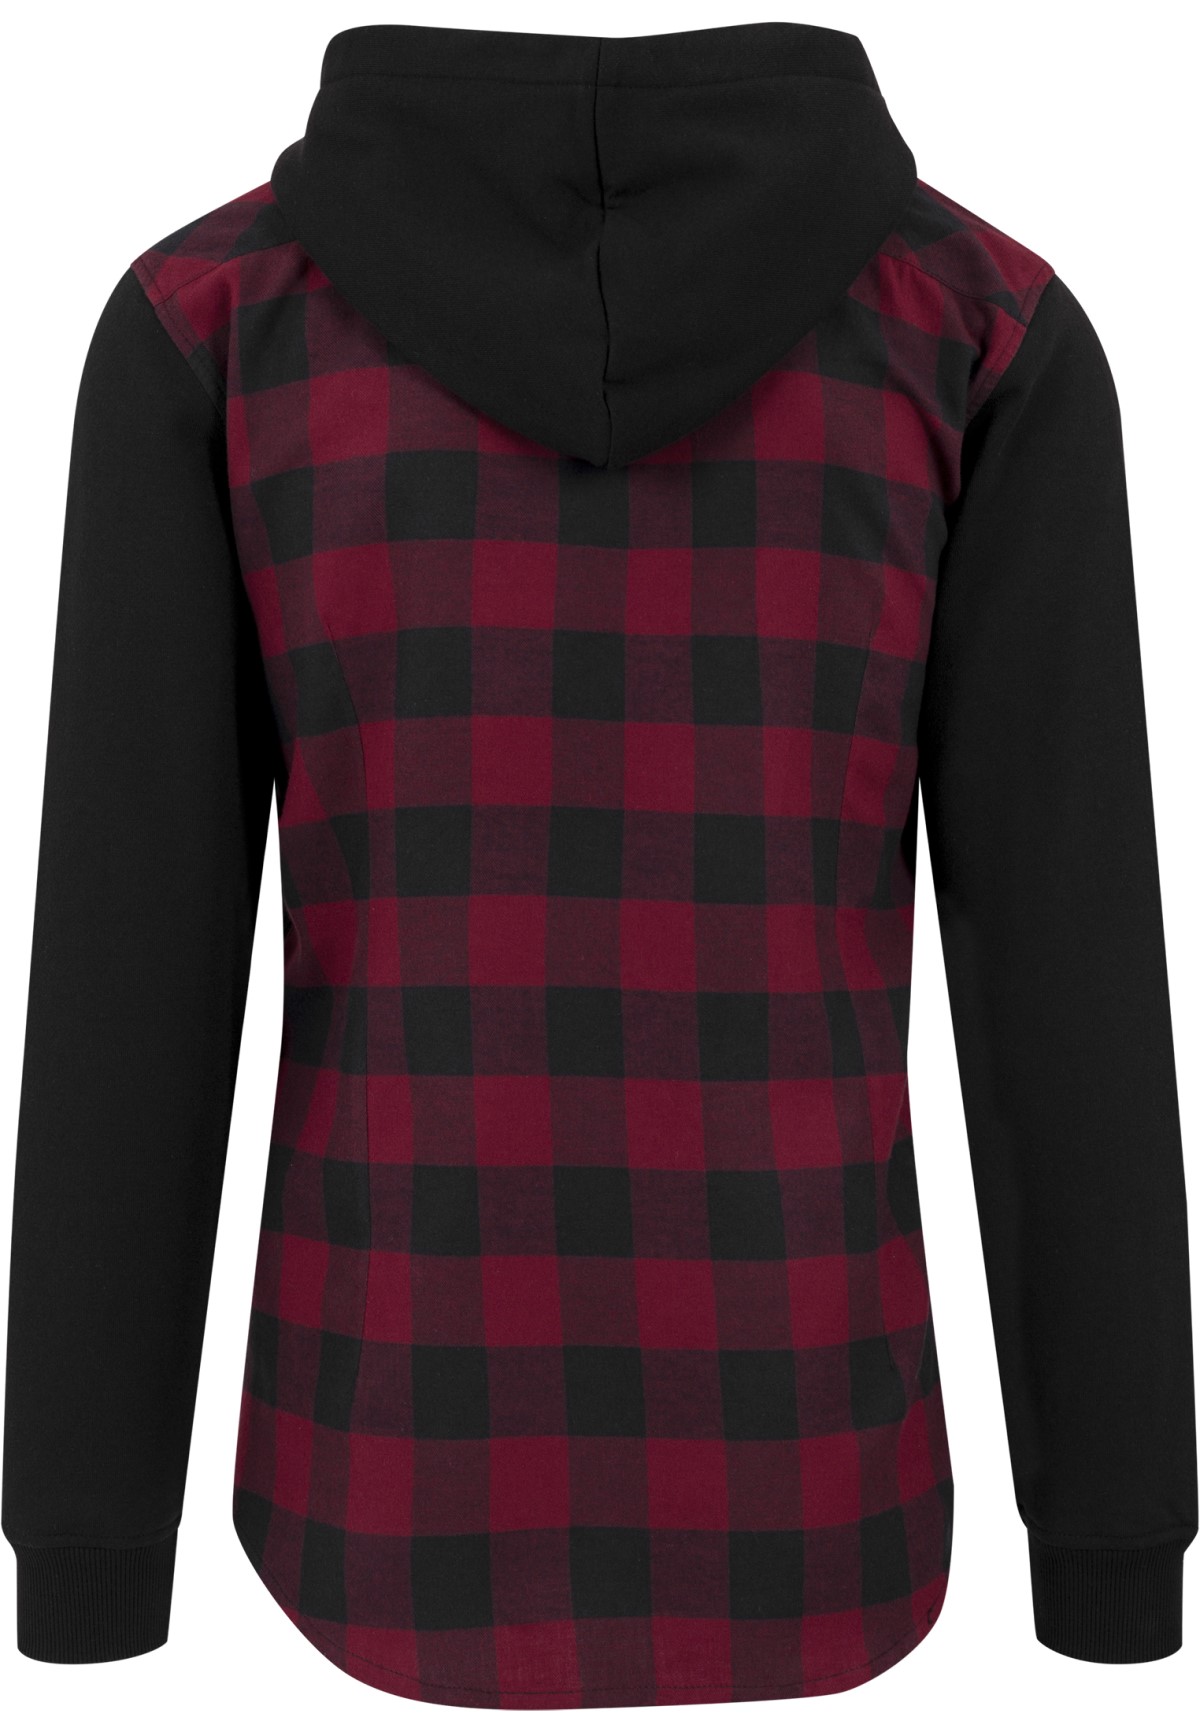 URBAN CLASSICS Hooded Checked Flanell schwarz rot XXL